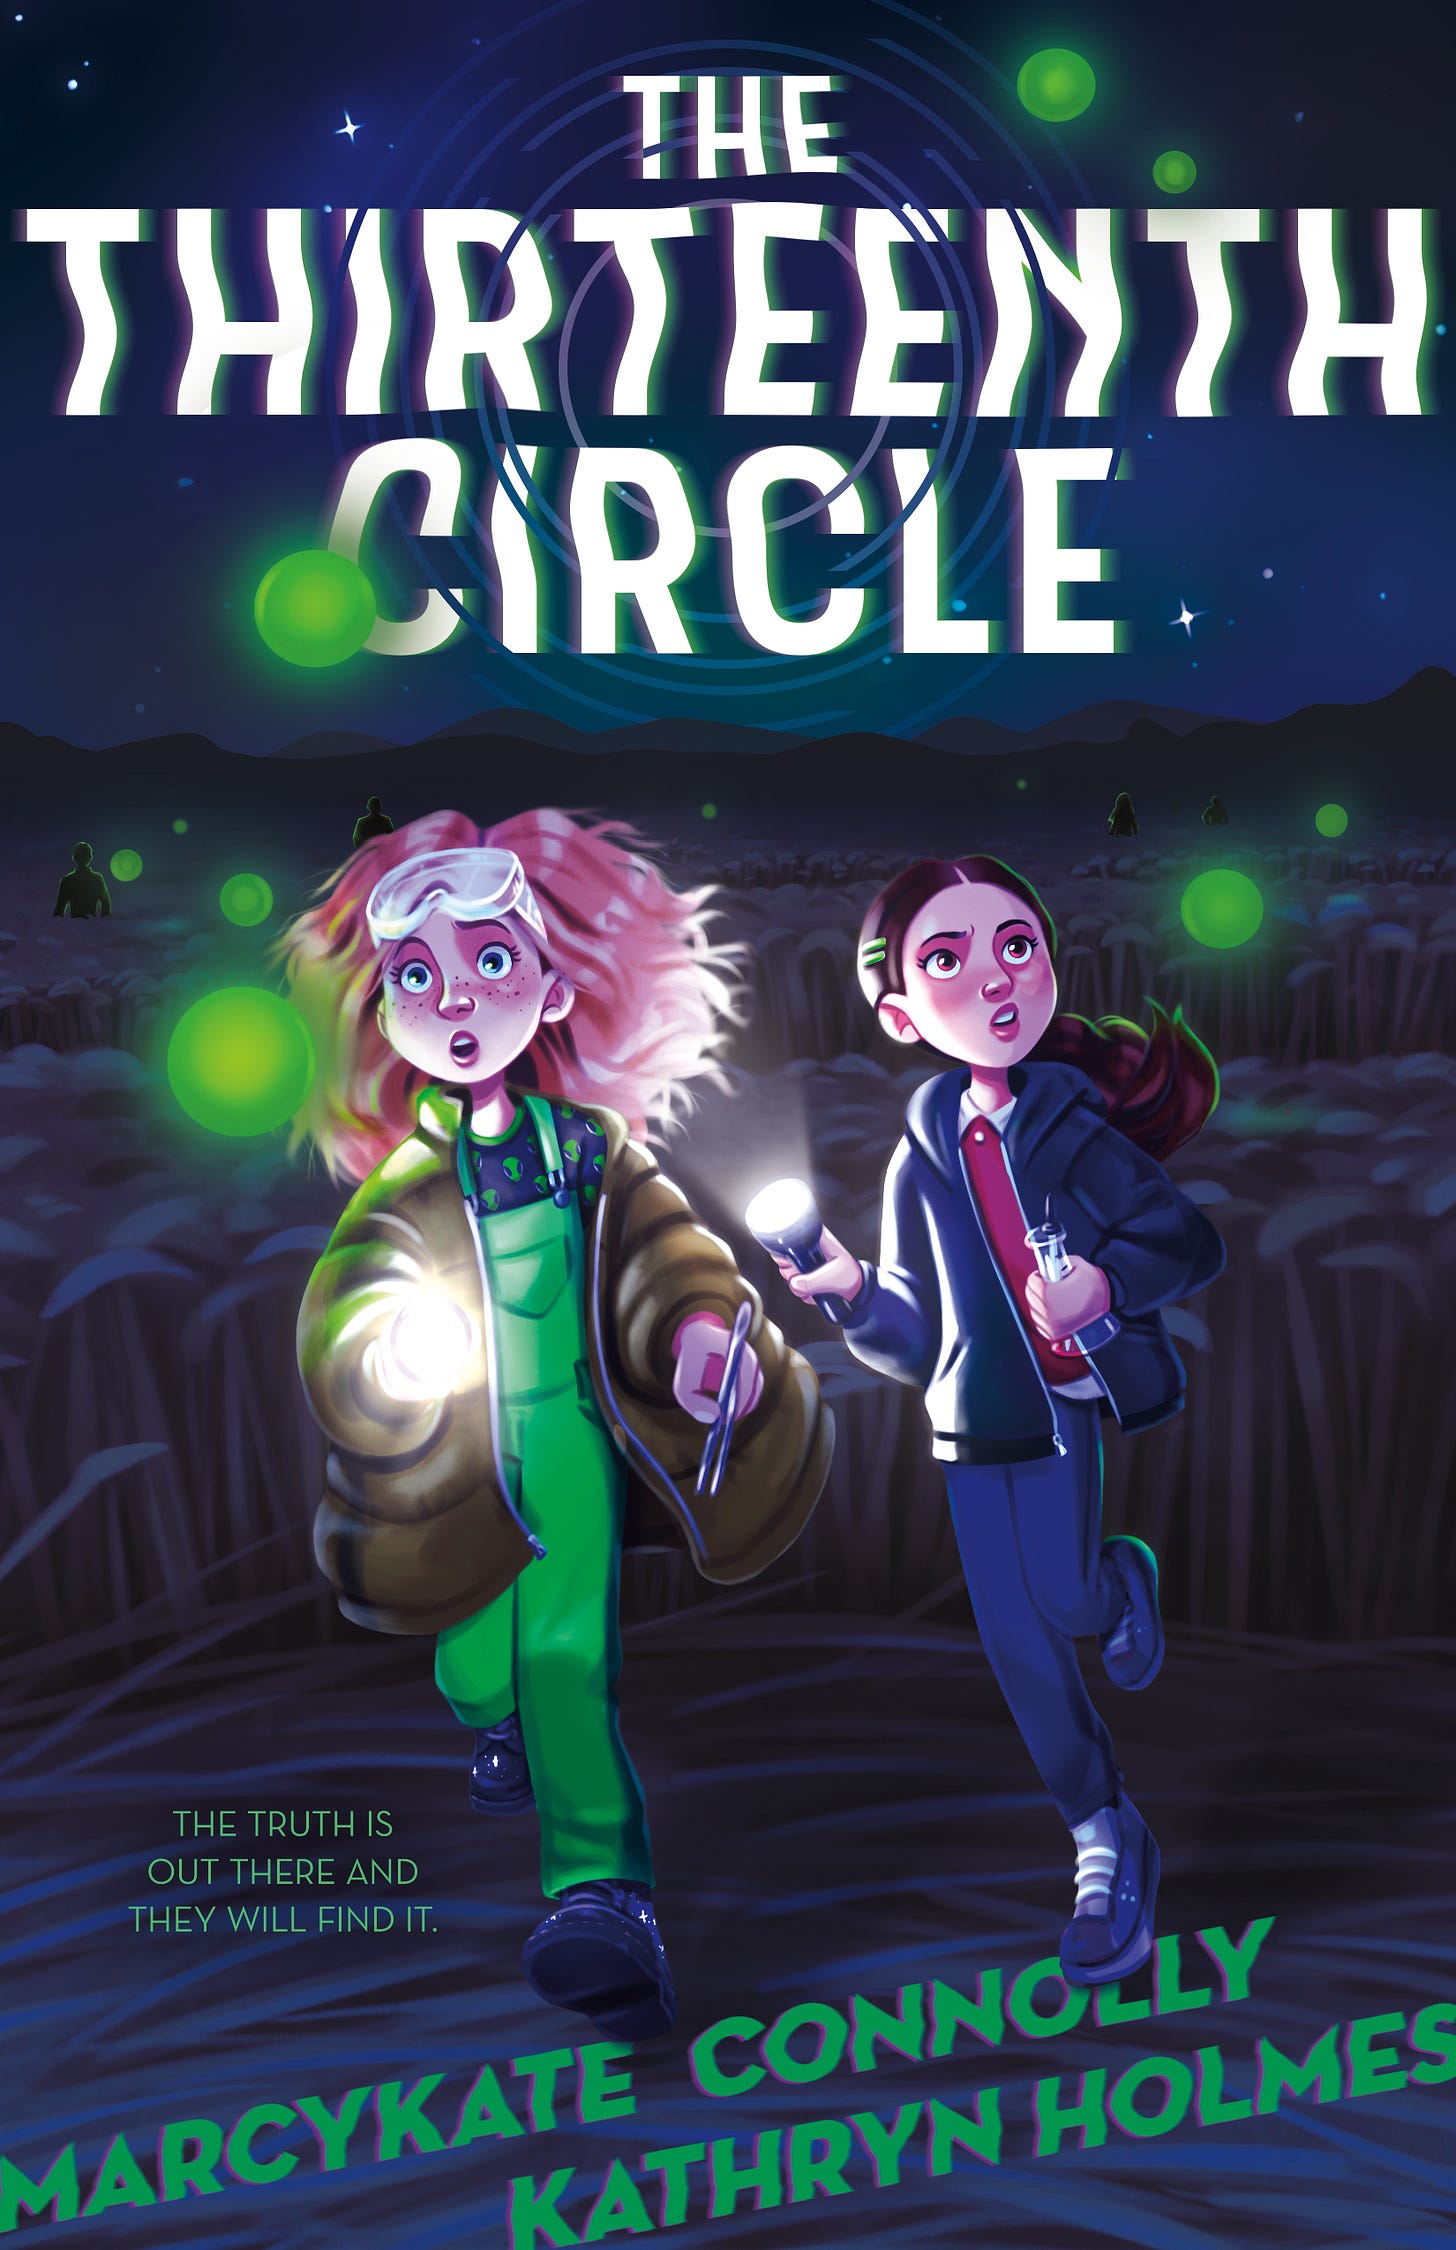 The cover of The Thirteenth Circle shows two girls running through a cornfield at night, chasing glowing green orbs.